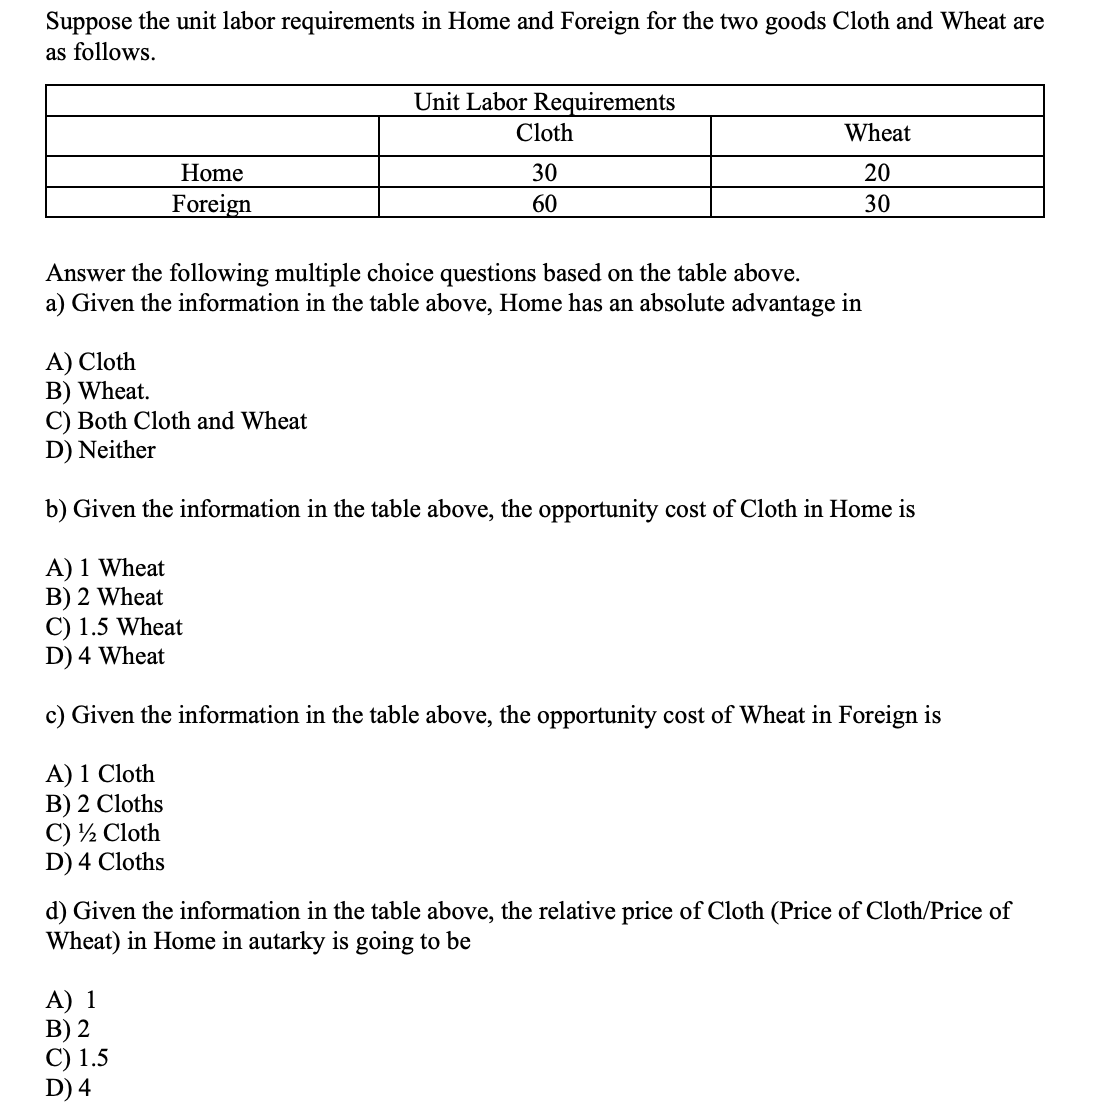 Suppose the unit labor requirements in Home and Foreign for the two goods Cloth and Wheat are
as follows.
Home
Foreign
Unit Labor Requirements
Cloth
30
60
Wheat
20
30
Answer the following multiple choice questions based on the table above.
a) Given the information in the table above, Home has an absolute advantage in
A) Cloth
B) Wheat.
C) Both Cloth and Wheat
D) Neither
b) Given the information in the table above, the opportunity cost of Cloth in Home is
A) 1 Wheat
B) 2 Wheat
C) 1.5 Wheat
D) 4 Wheat
c) Given the information in the table above, the opportunity cost of Wheat in Foreign is
A) 1 Cloth
B) 2 Cloths
C) ½ Cloth
D) 4 Cloths
d) Given the information in the table above, the relative price of Cloth (Price of Cloth/Price of
Wheat) in Home in autarky is going to be
A) 1
B) 2
C) 1.5
D) 4